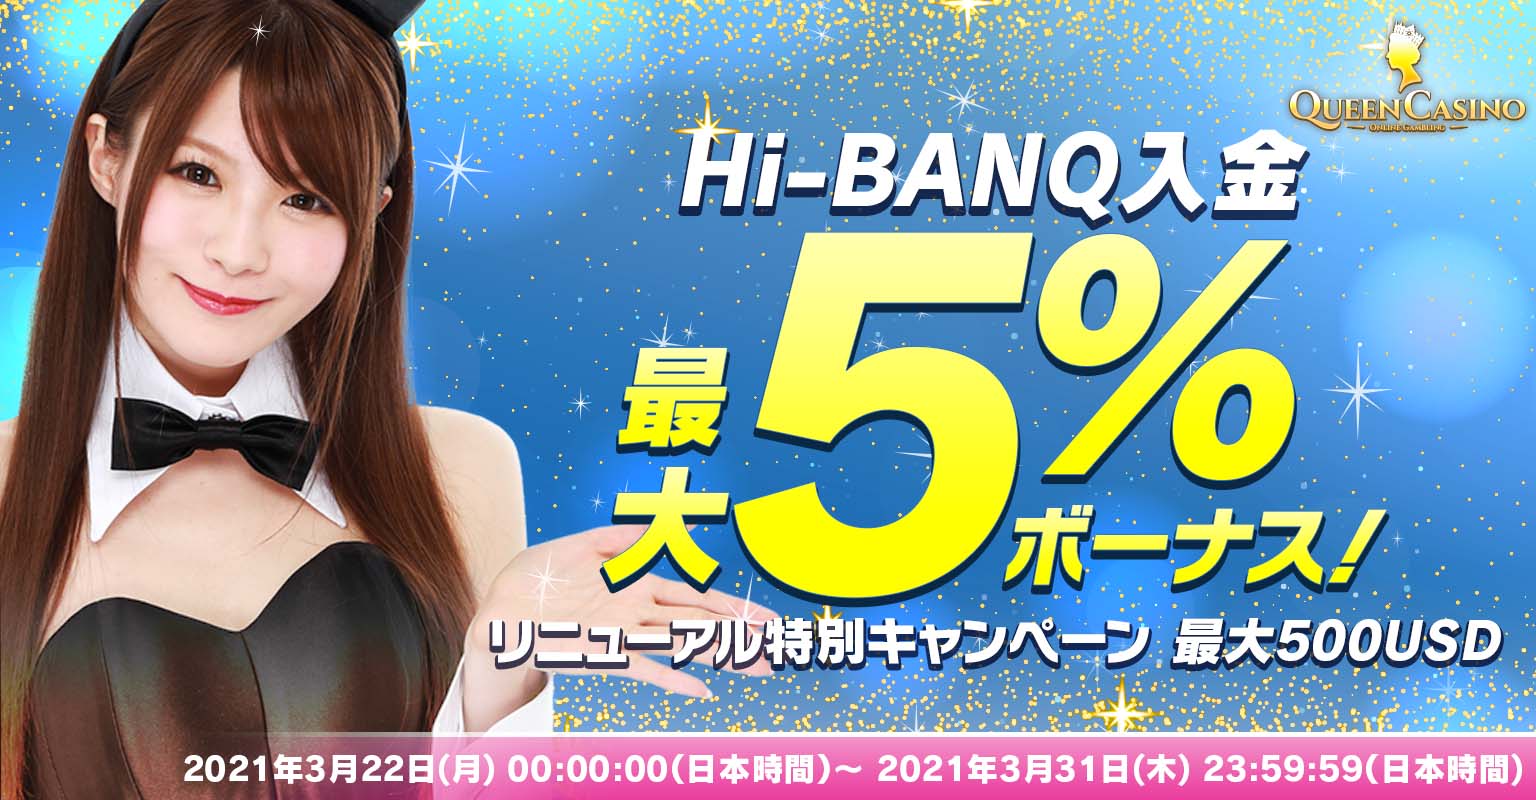 Earn from 1% to 5% of your deposit using Hi-BANQ during the promo event. Please read on how to claim your bonus in Queen Casino.